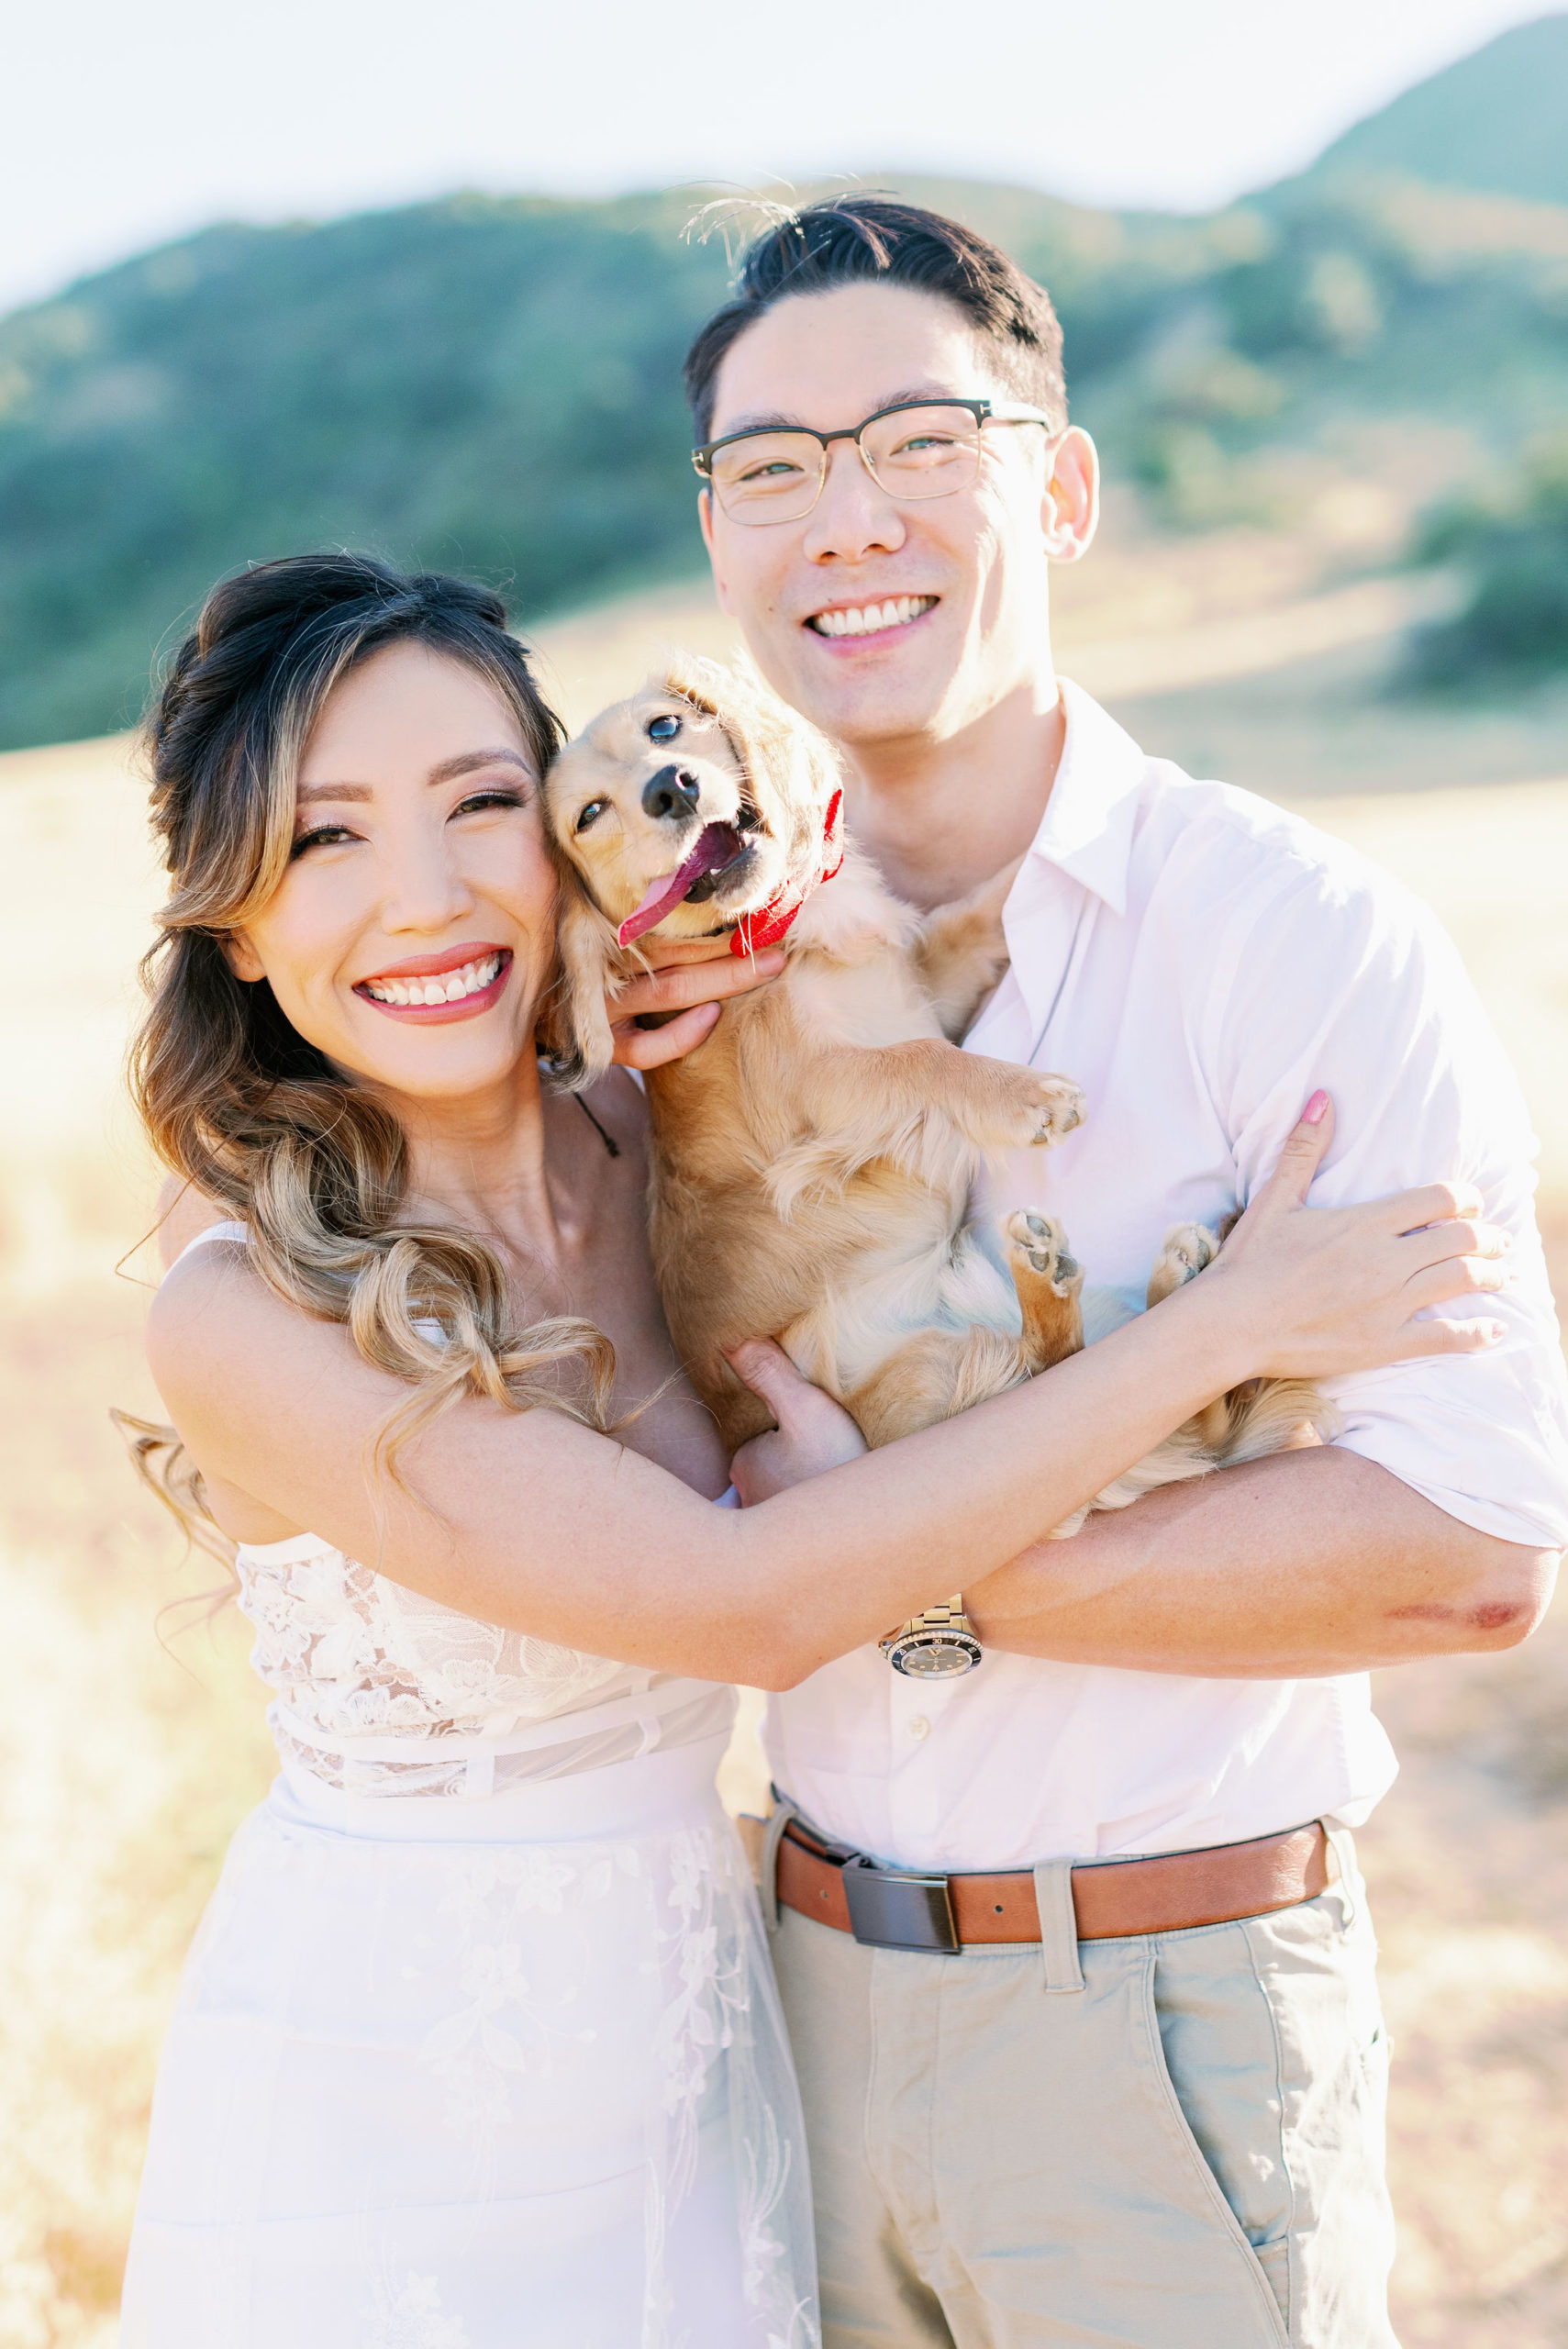 5 Tips for Including Your Pet in Your Engagement Photos